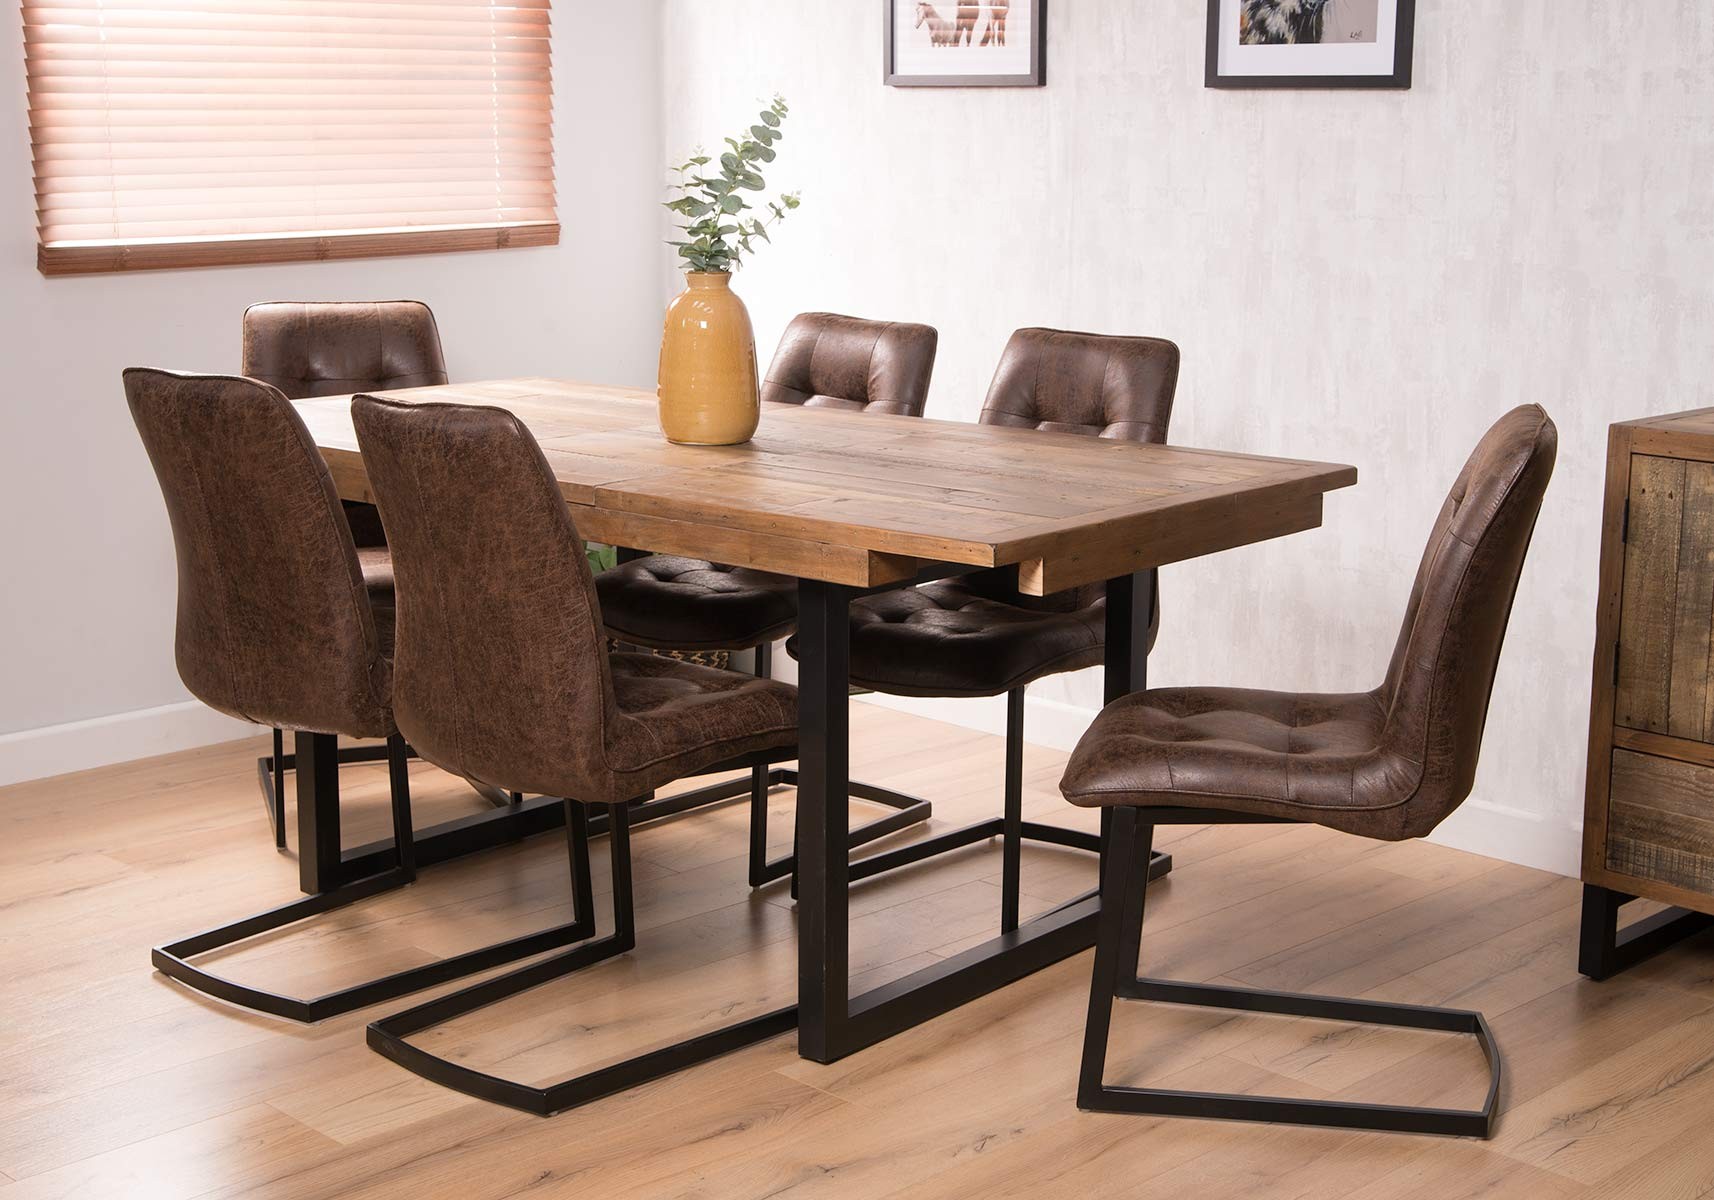 Industrial Reclaimed Extending 6 Seater Dining Set Cantilever Chairs Casa Bella Furniture Uk